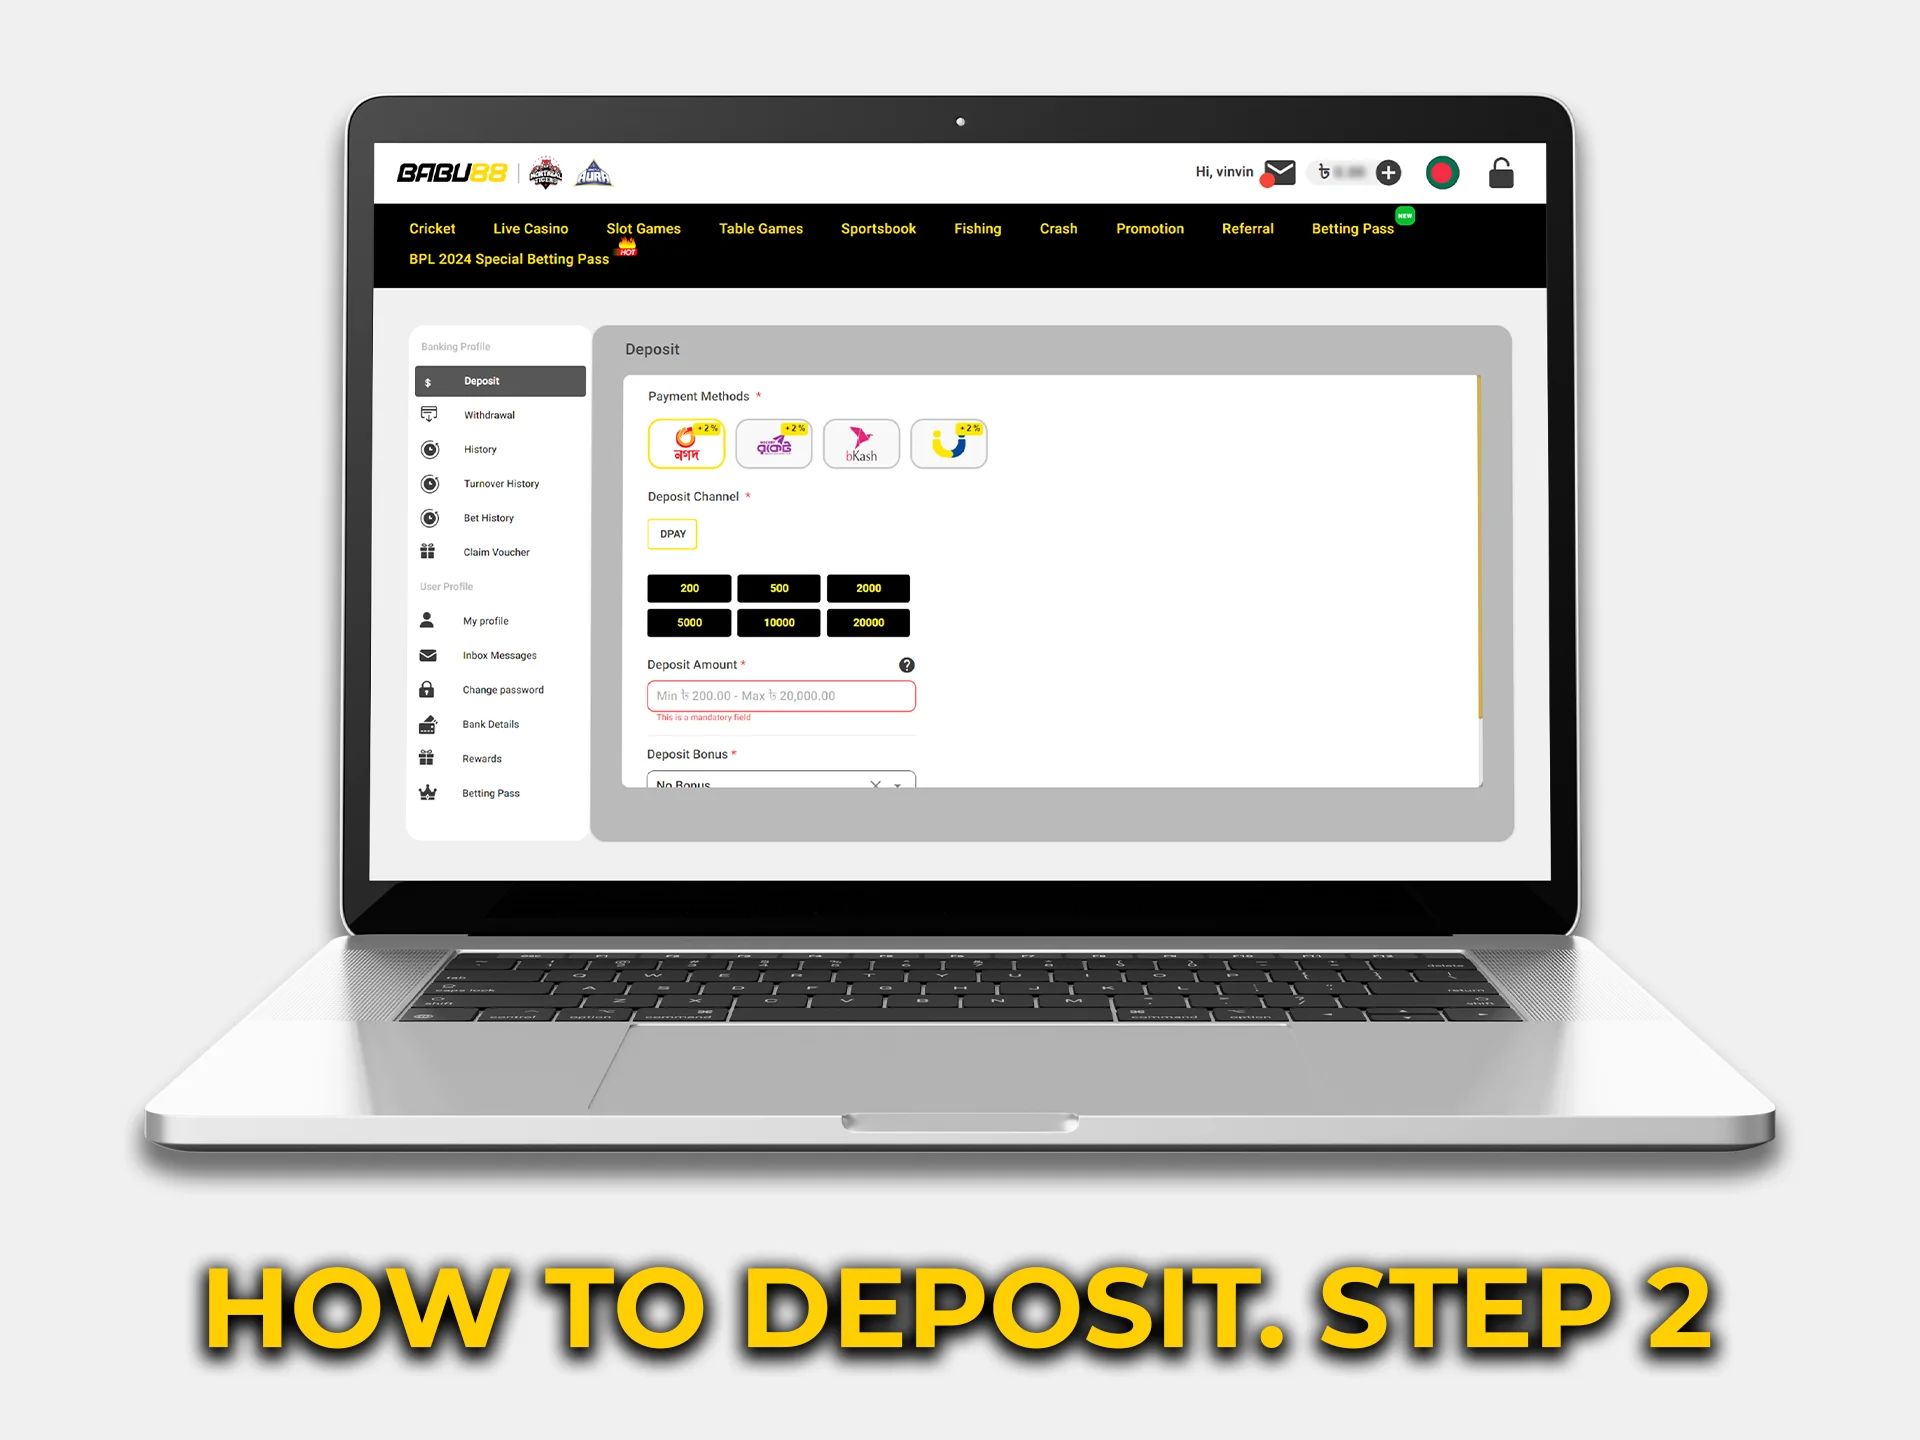 Open the deposit page where you can start the deposit procedure.